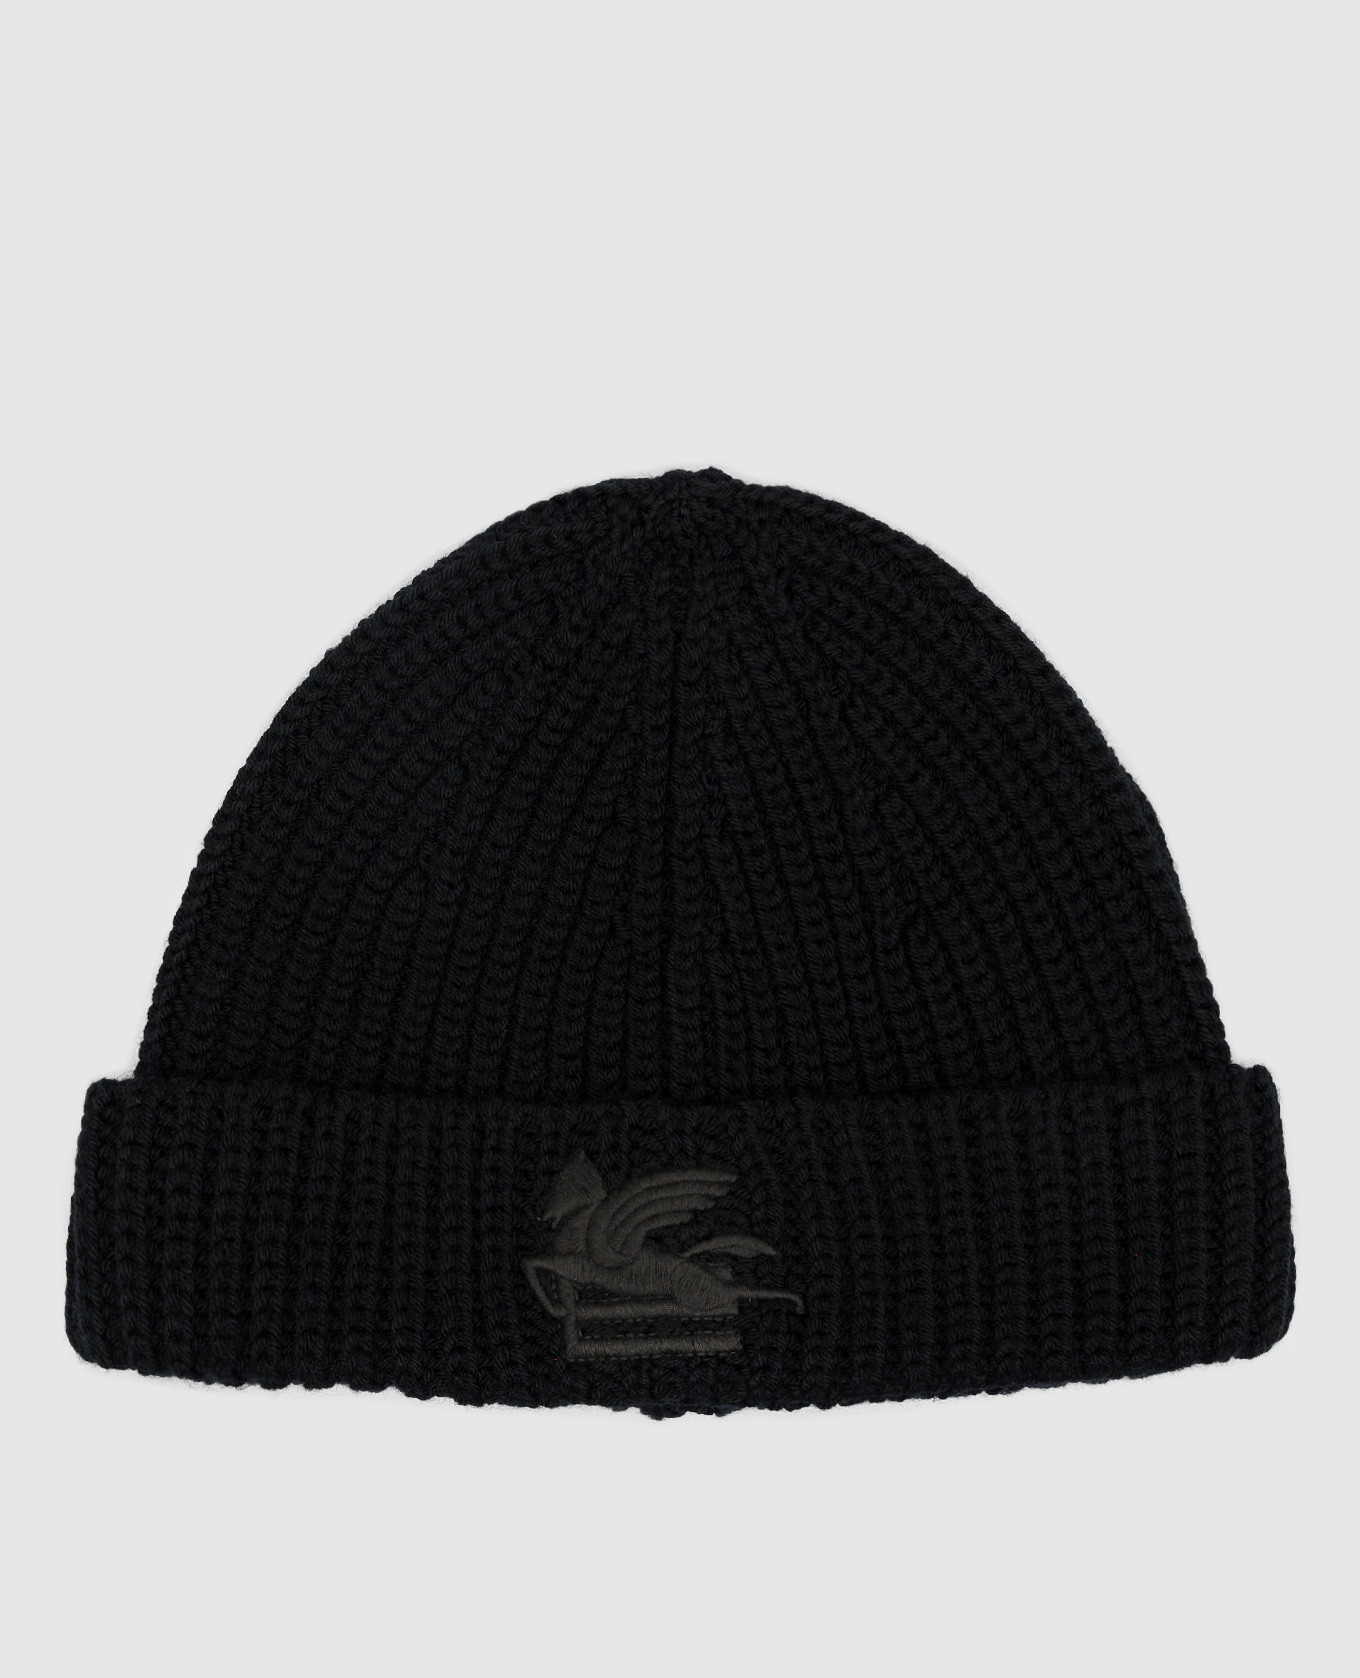 Black wool cap with logo embroidery